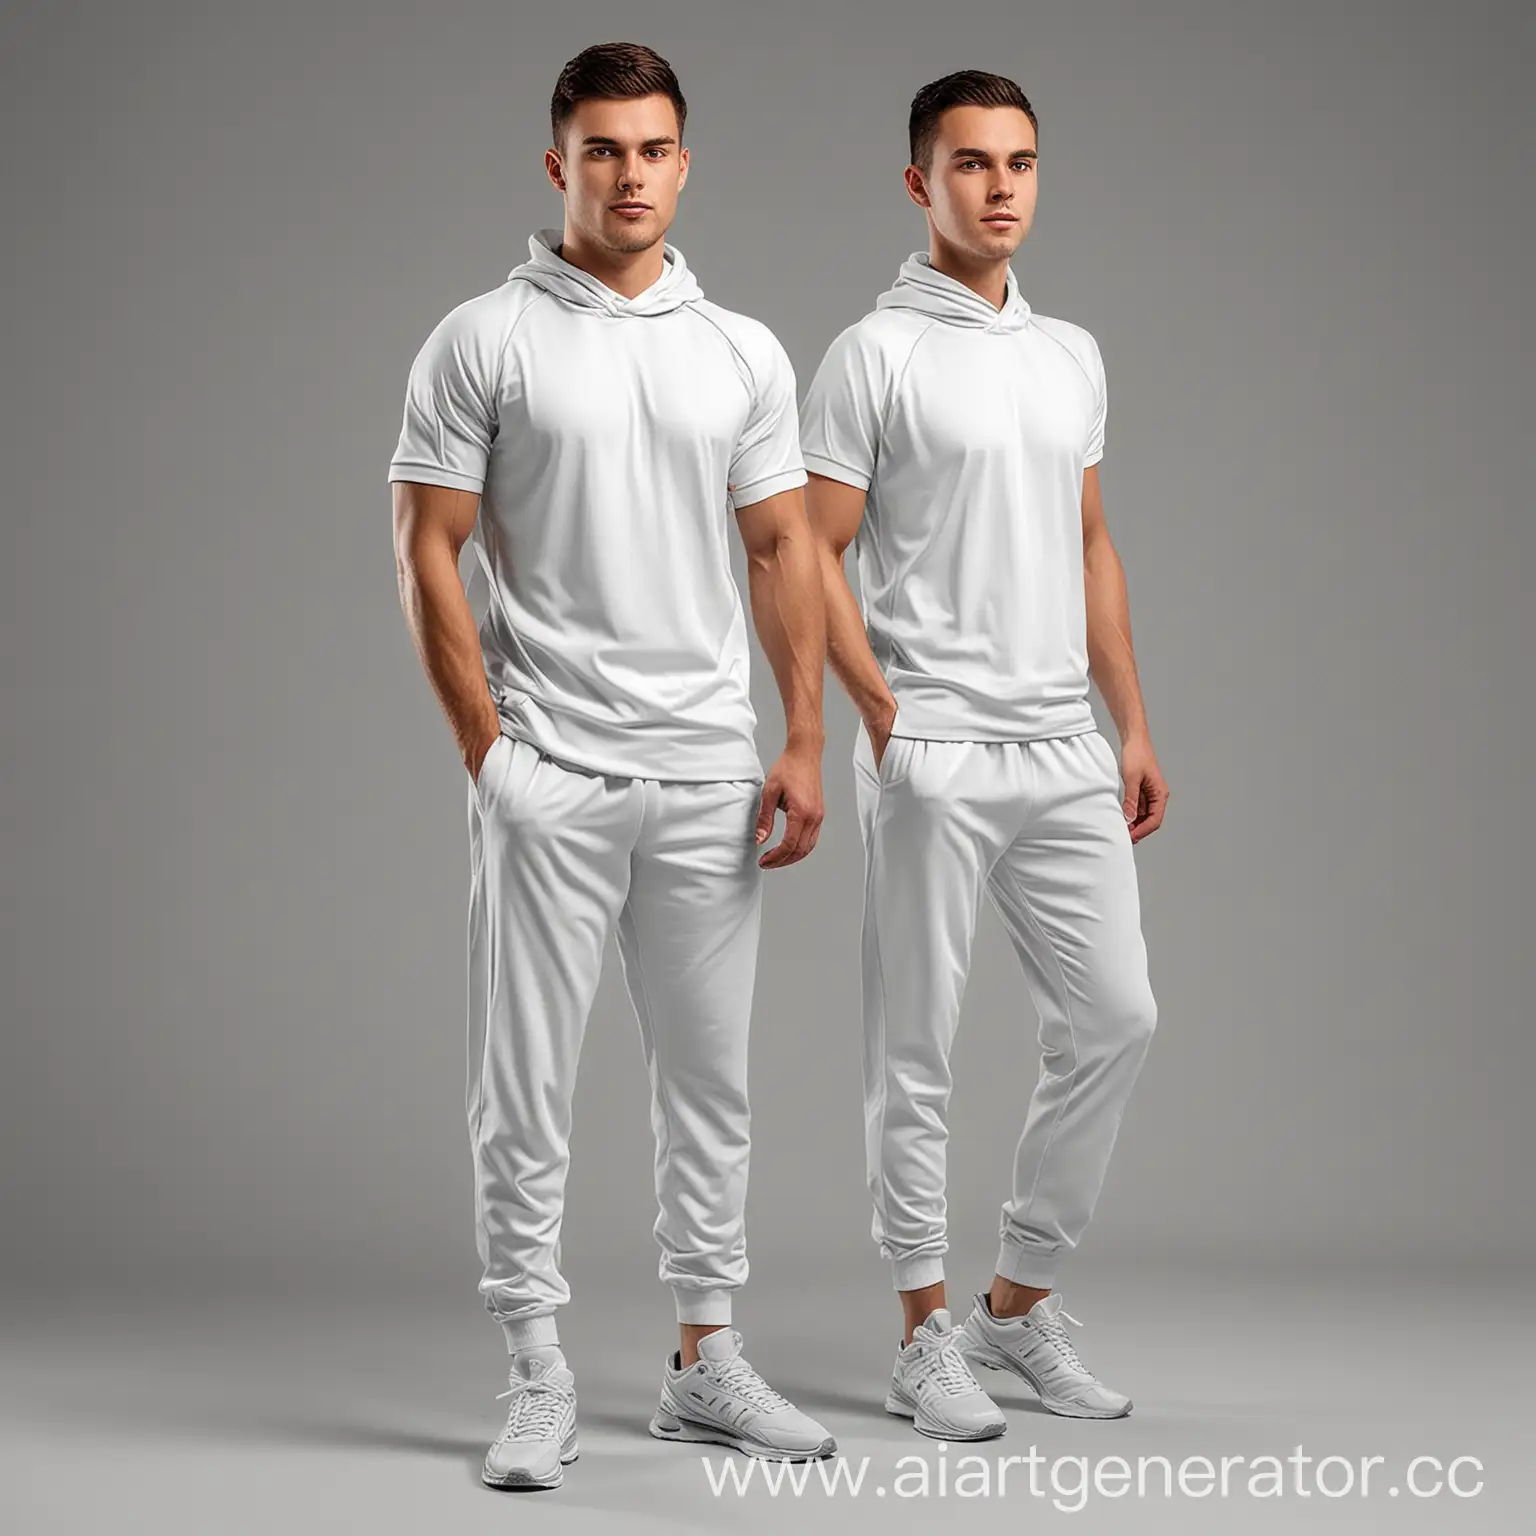 MockUp-of-Sportswear-Apparel-on-a-Full-Body-Mannequin-in-White-Cloth